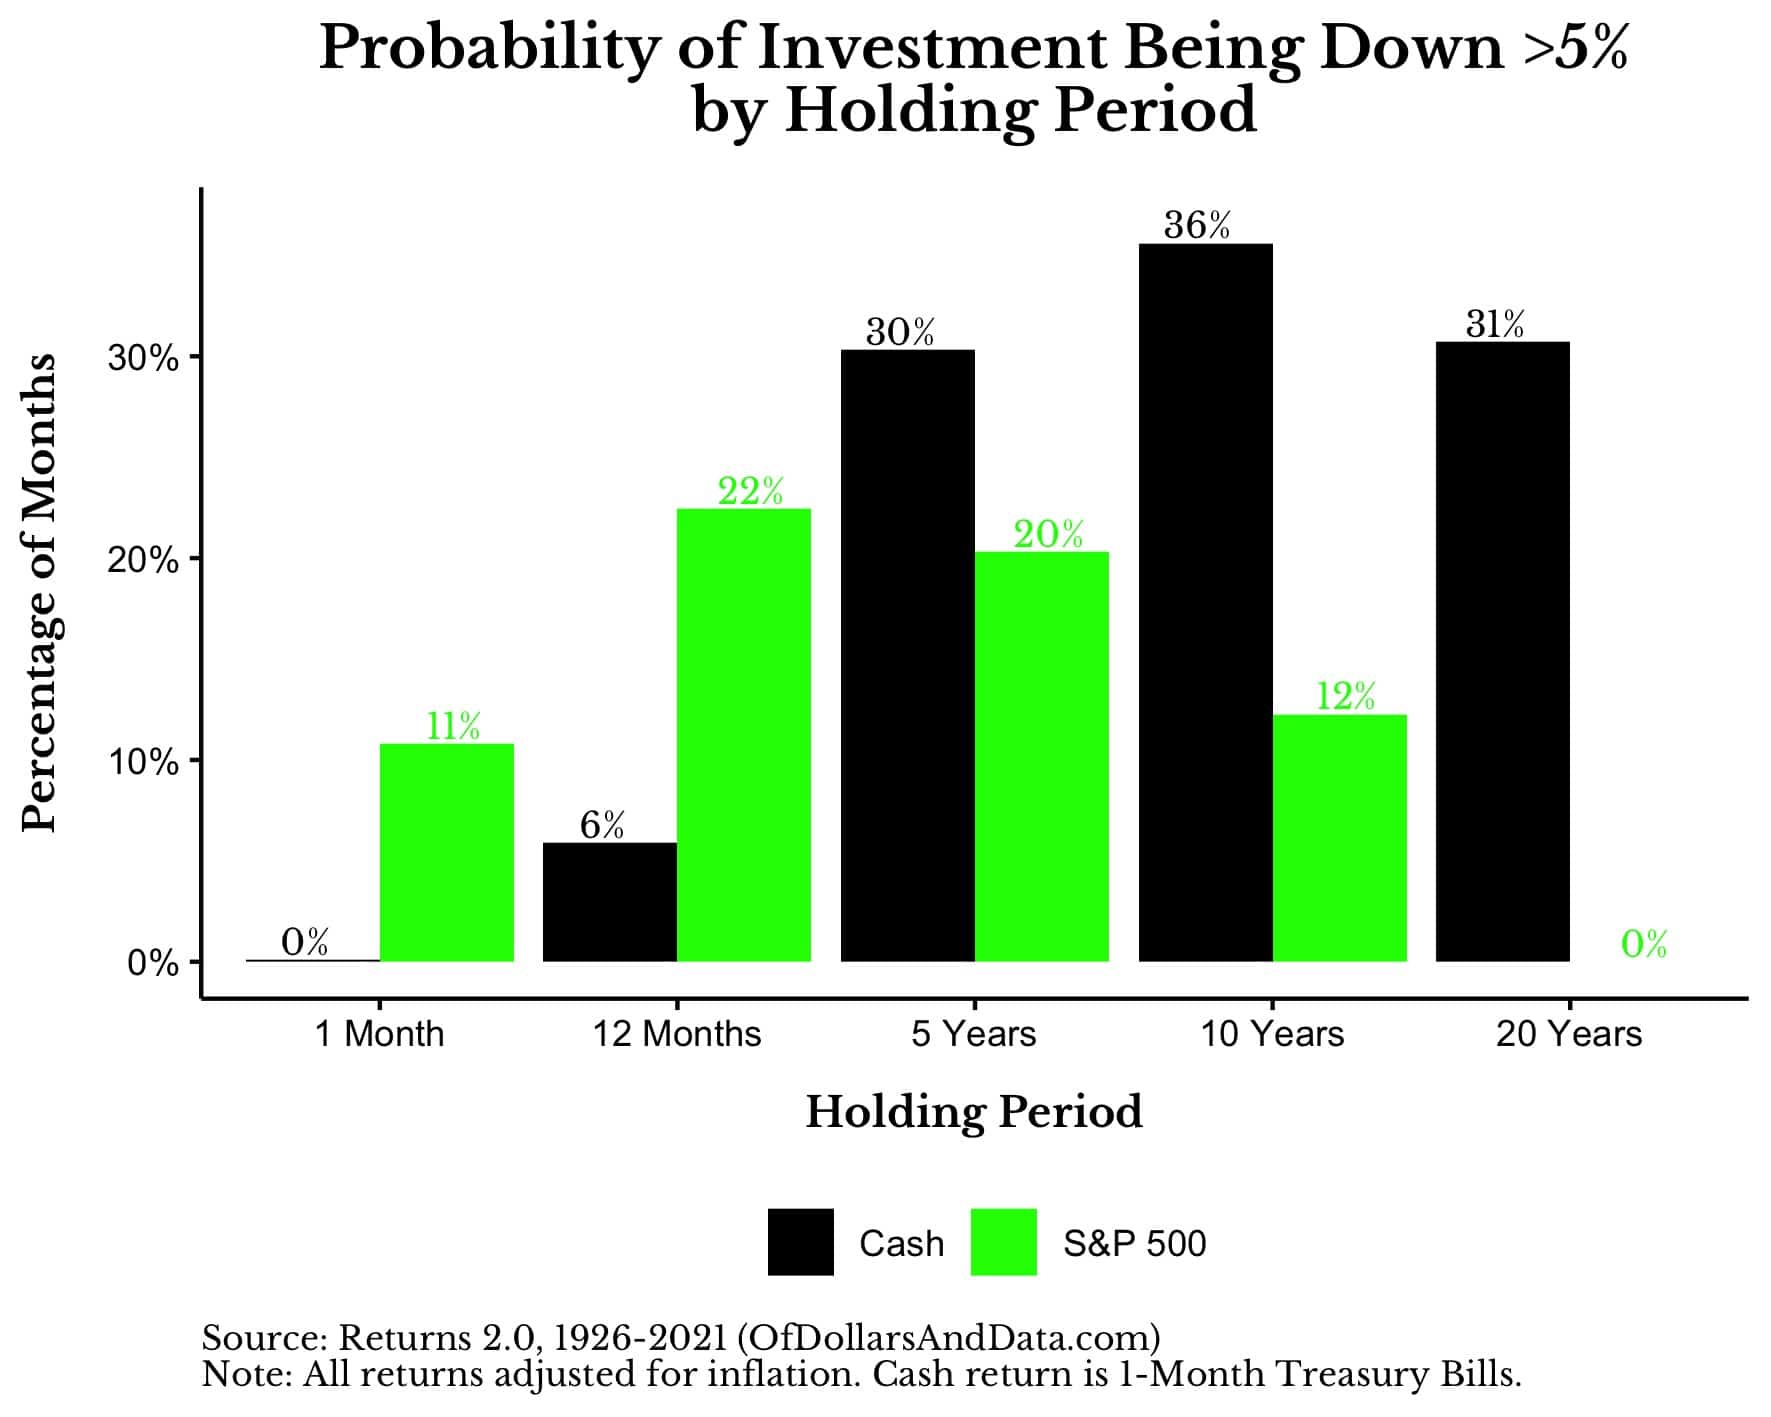 Chart showing percentage chance of investment being down by more than 5% over various holding periods for cash and the S&P 500.